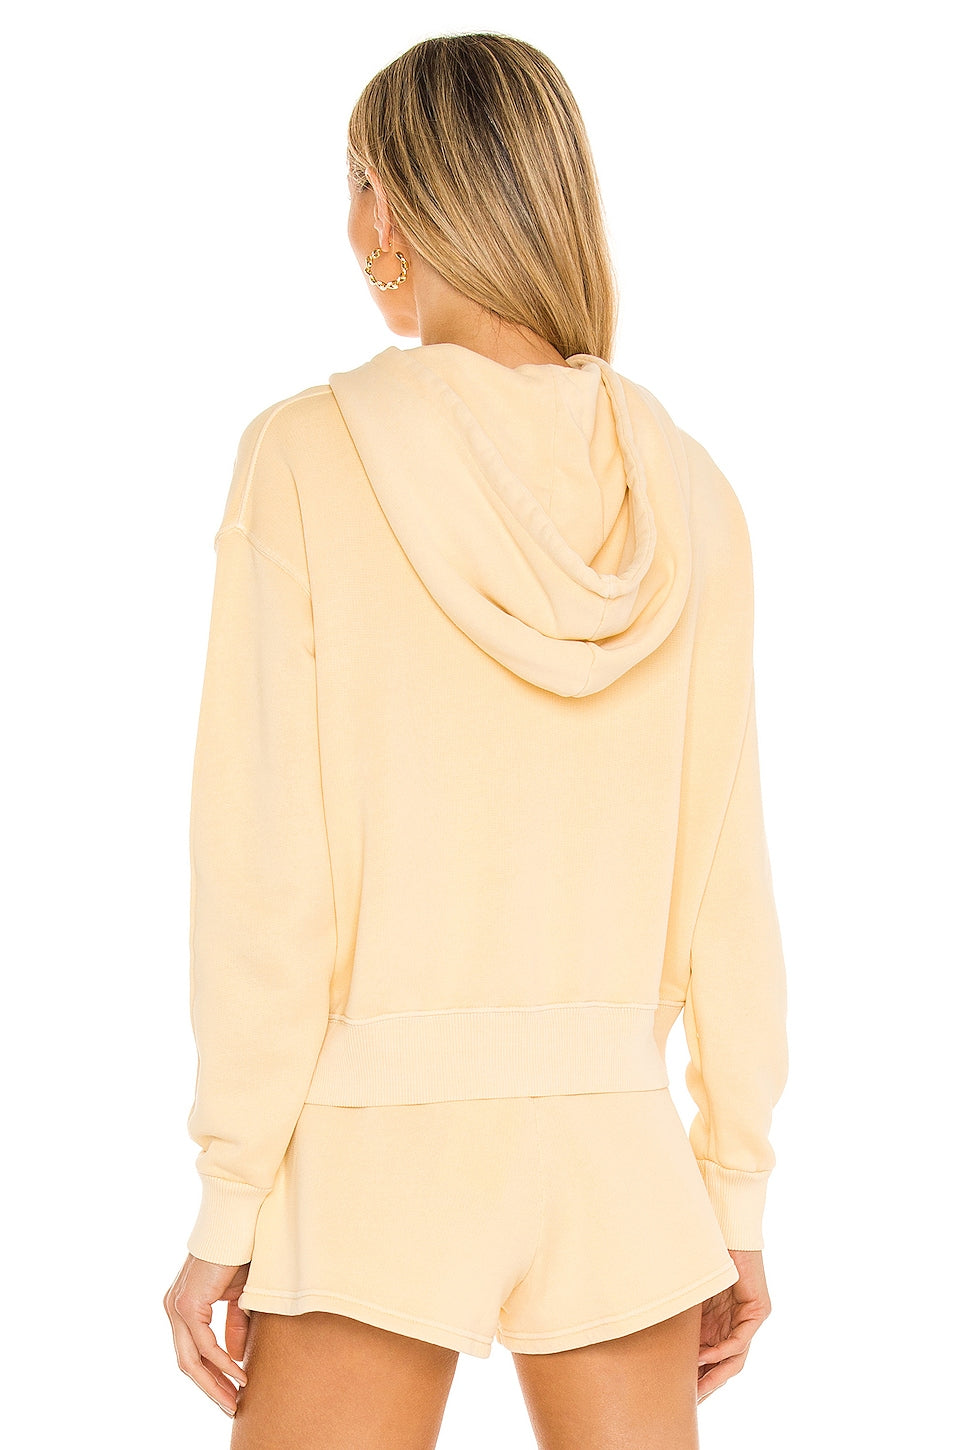 Green The Gaia Zip Up Hoodie in BUTTER YELLOW